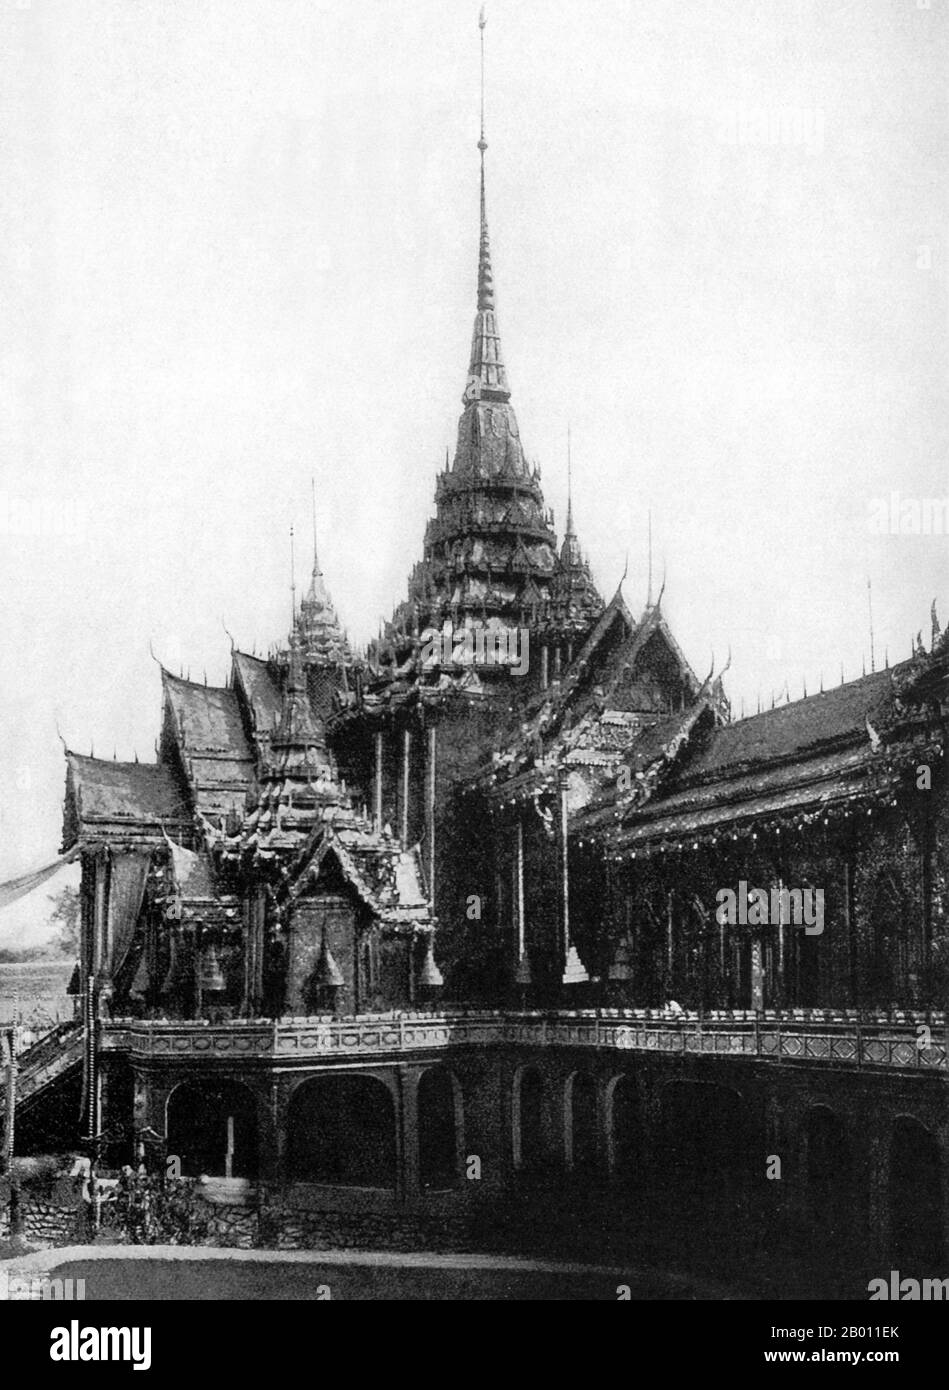 Thailand: The cremation site in Bangkok for a prince during the reign of King Chulalongkorn (1868—1910).  Elaborate pavilions and Buddhist temples were constructed for royal funerals in 19th-century Siam. The body of the deceased was embalmed and preserved while the cremation site was built. Funereal rites and a period of mourning could take months or even a year before the funeral took place. The embalmed body was then placed in a kneeling position in a gold urn on a high bier inside an ornate edifice to be cremated. Stock Photo